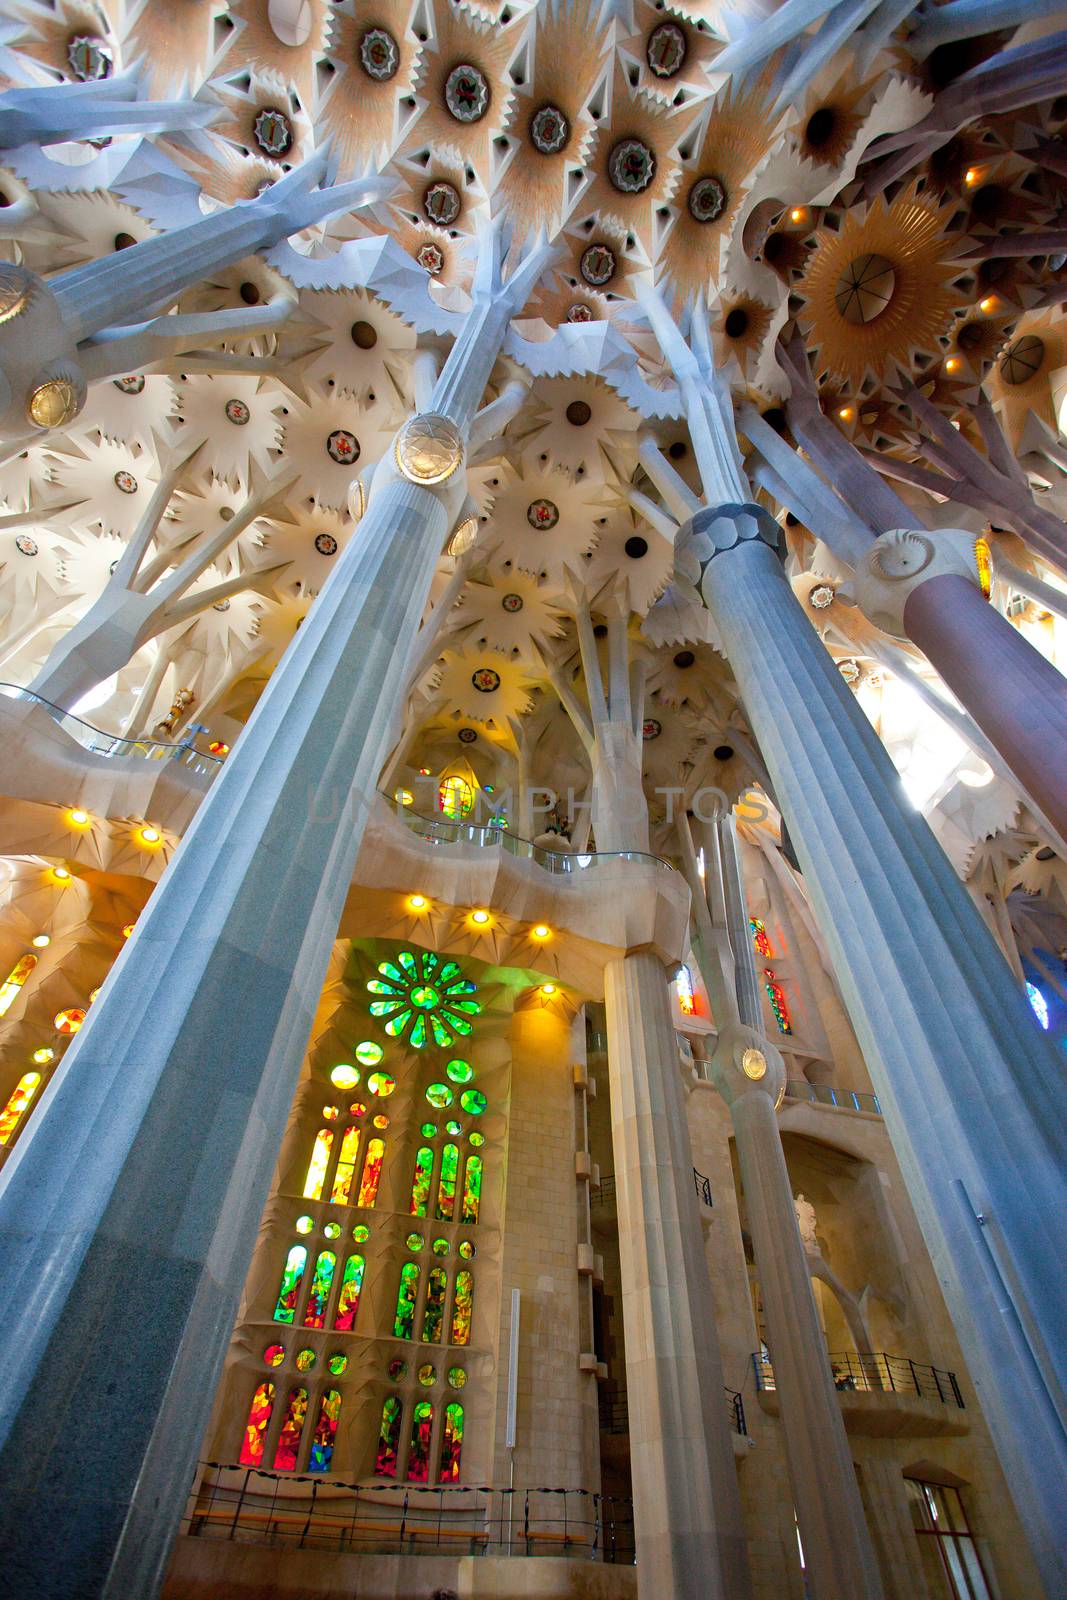 BARCELONA SPAIN – JUNE 13: "La Sagrada Familia", the cathedral designed by Gaudi, which is being build since 19 March 1882 with the donations of people, on JUNE 13, 2013 in Barcelona Spain